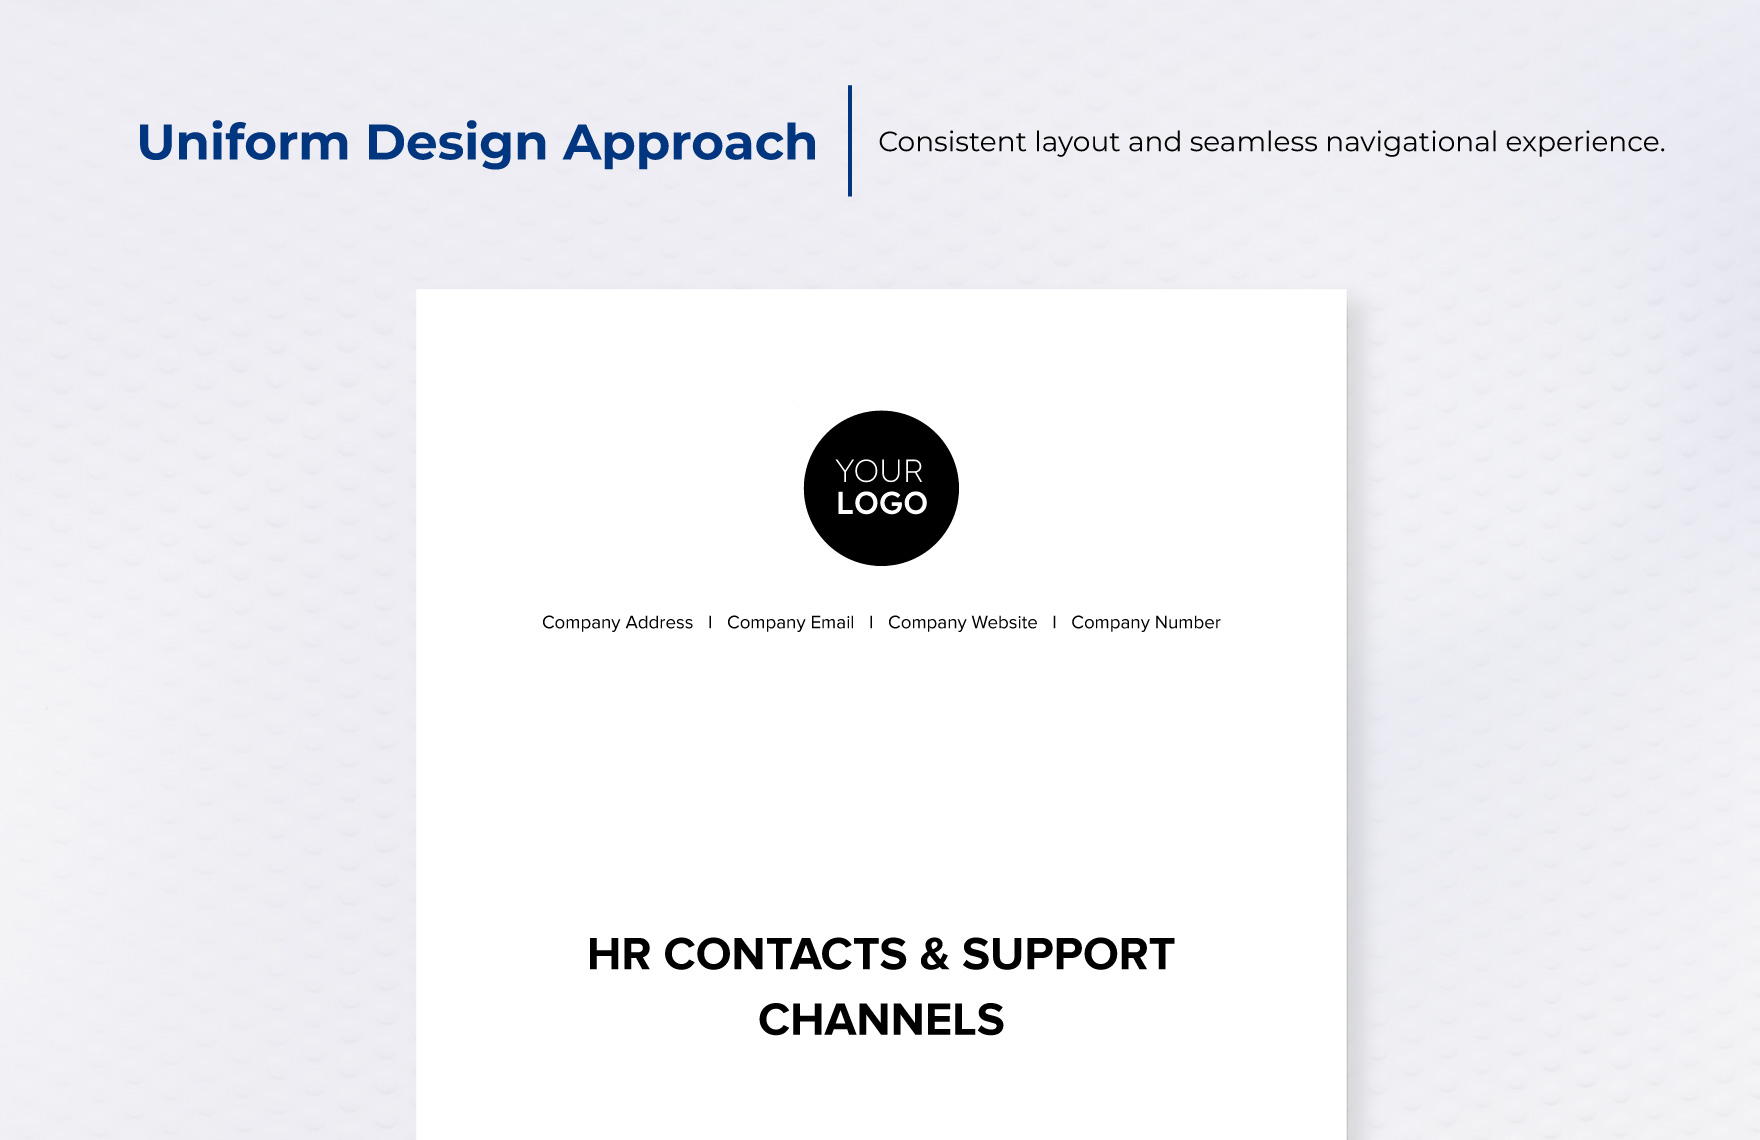 HR Contacts & Support Channels Template